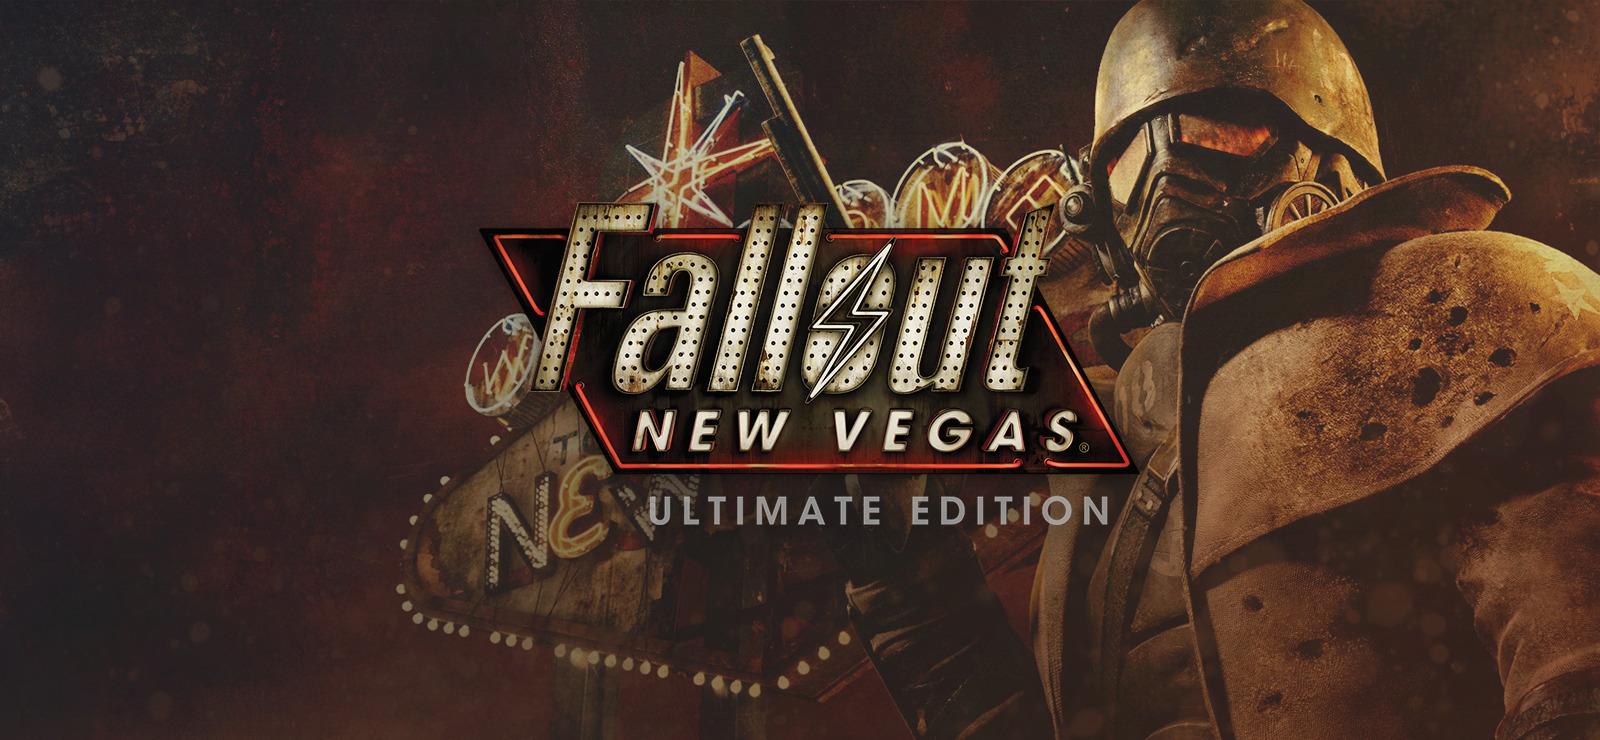 Fallout new vegas steam на русском языке фото 26